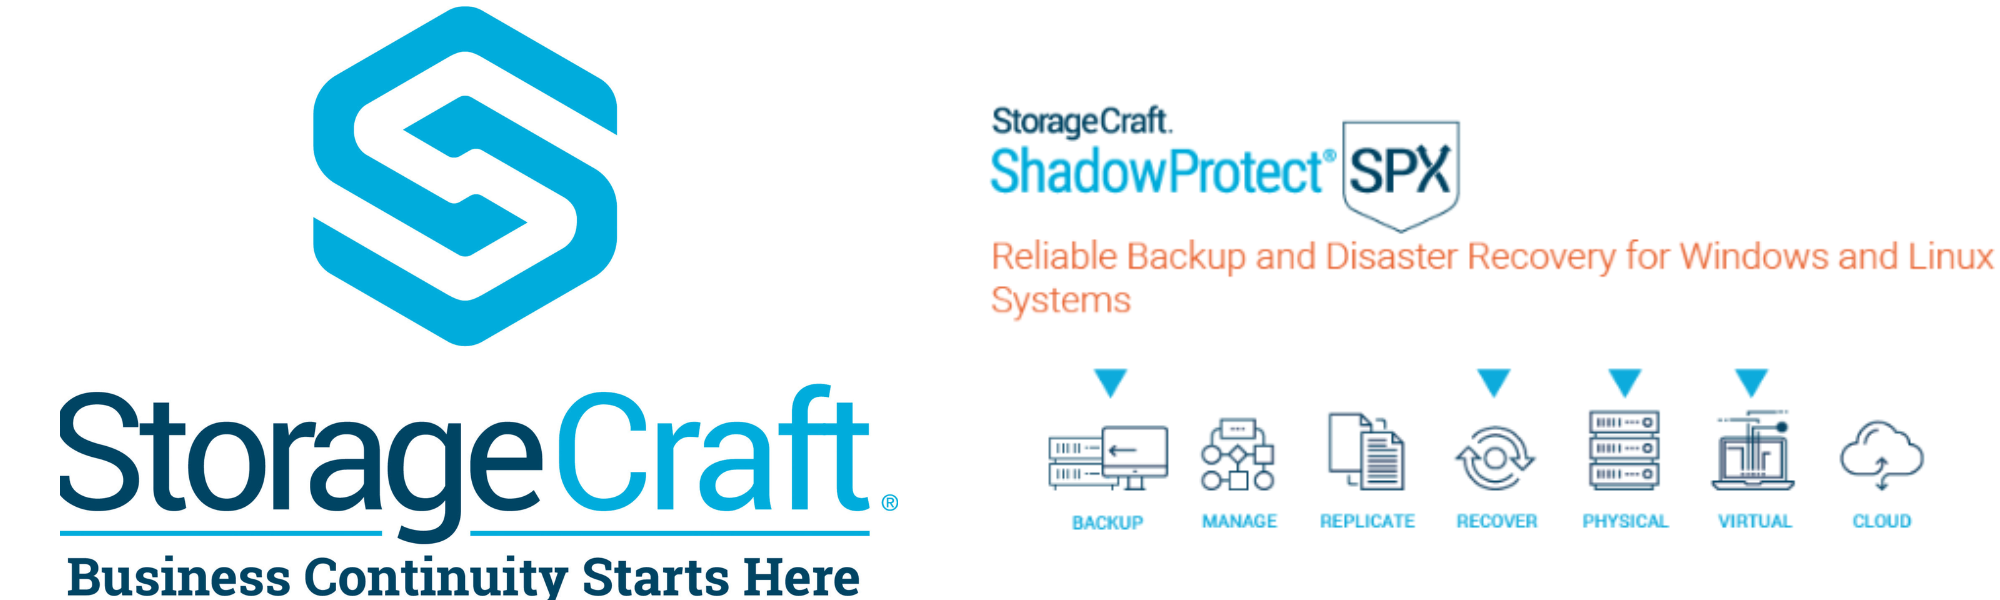 StorageCraft ShadowProtect Backup: The best protection for your business data